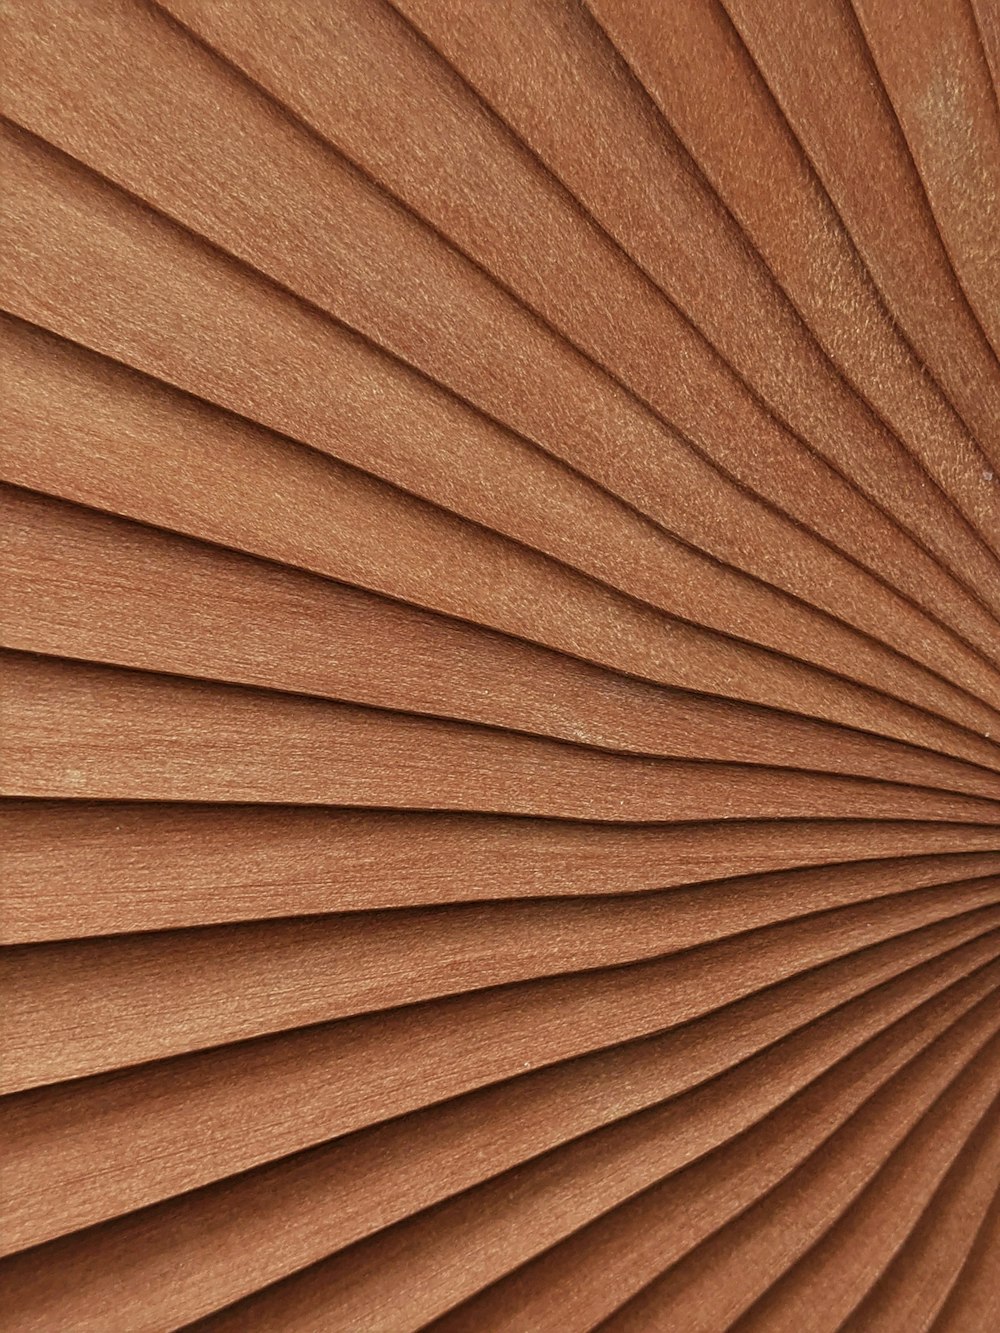 brown wooden board in close up photography